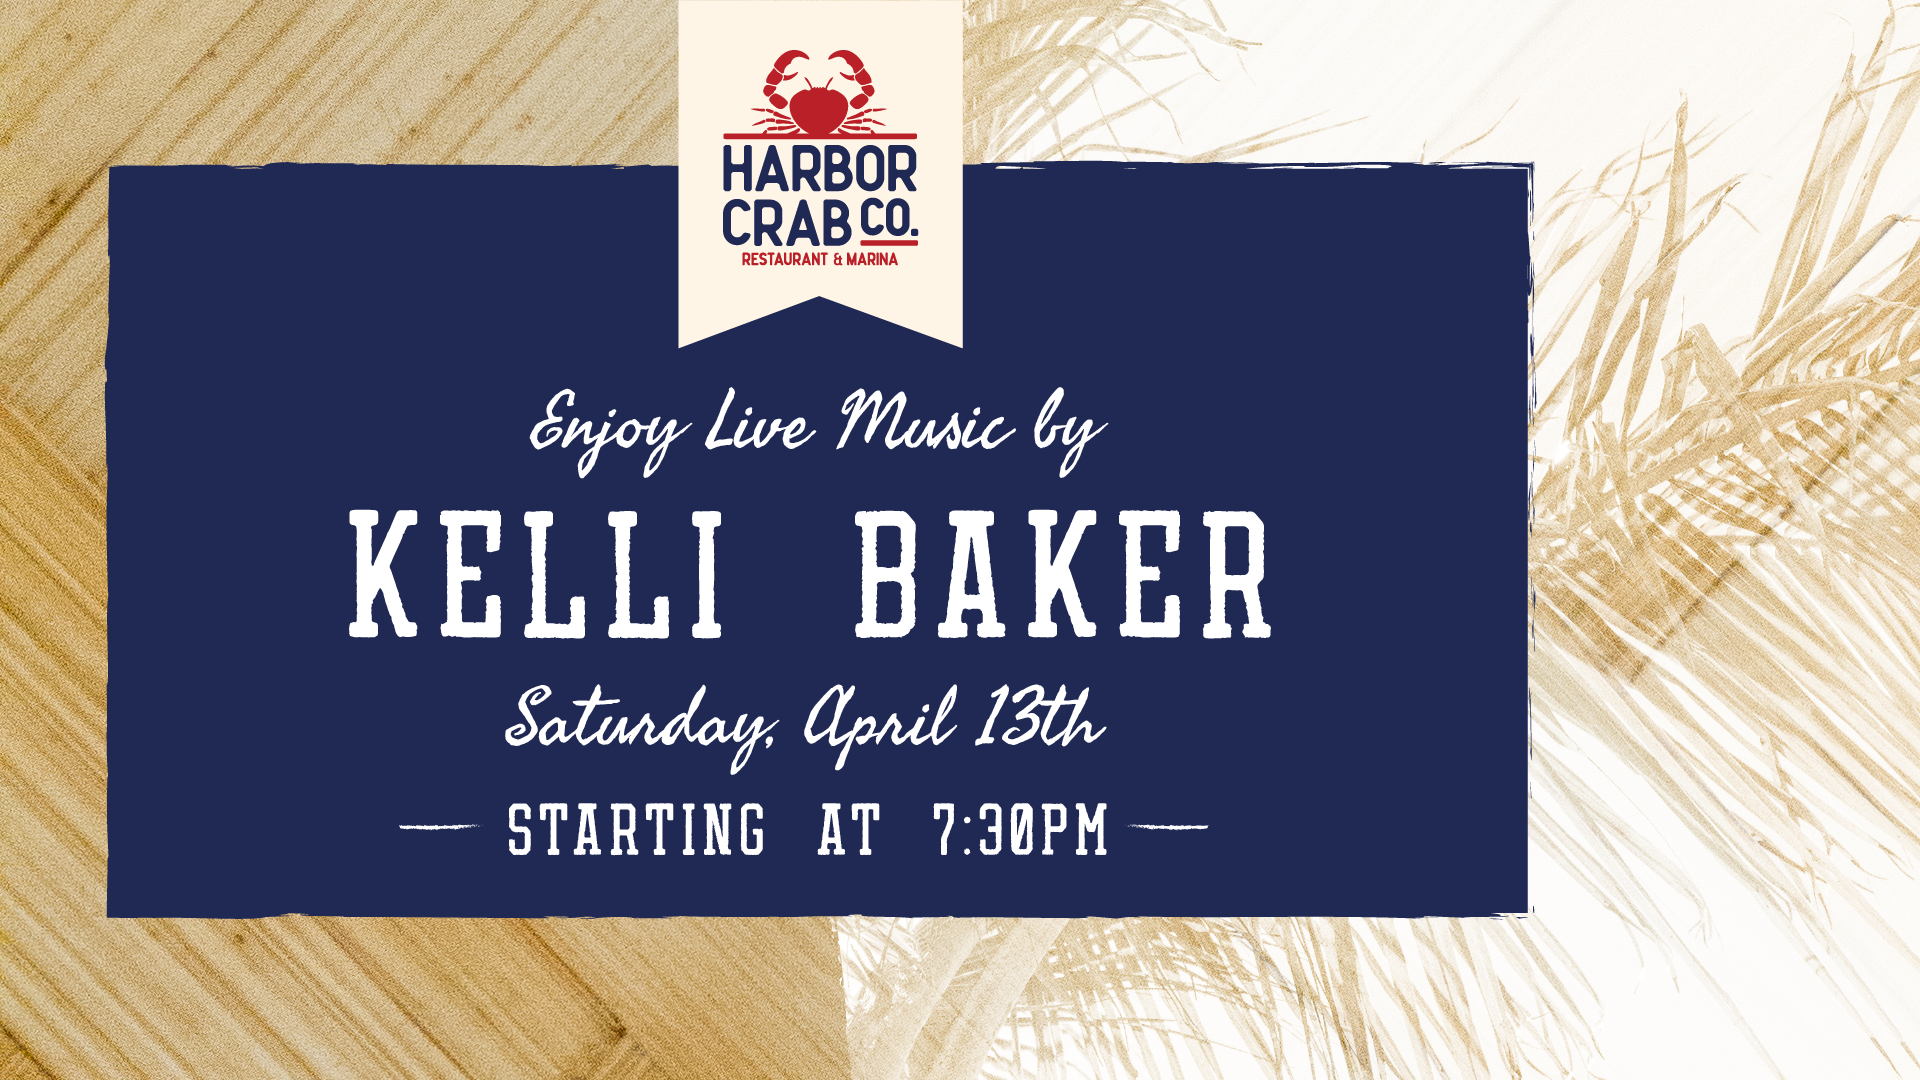 Live music by Kelli Baker on Saturday, April 13 at 7:30PM.